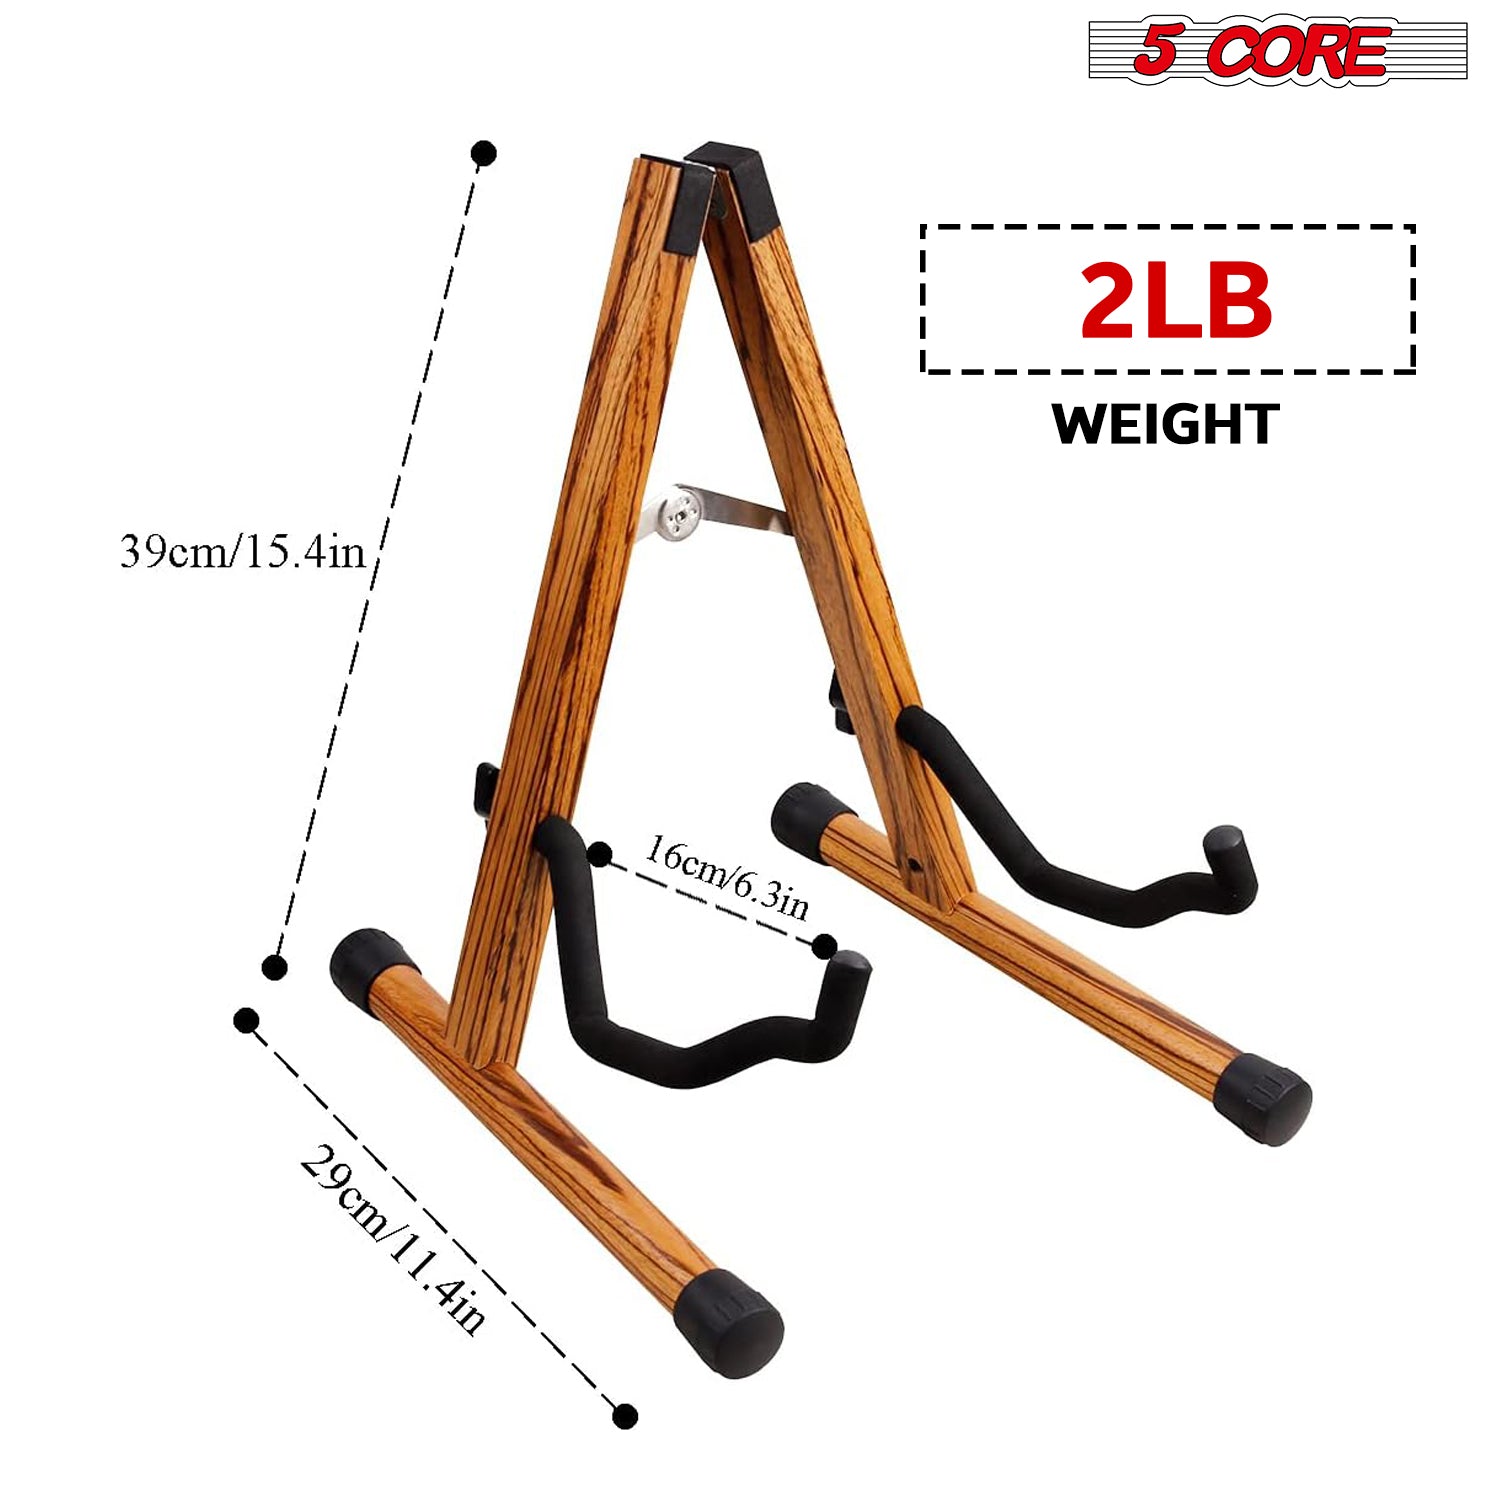 5 Core Guitar Stand Wooden Guitar Holder Premium Adjustable Music Stand for Guitar Players A Frame Folding Guitar Stand Holds Acoustic Bass Cello Mandolin Banjo Perfect Gifts For Guitar Players - GSS WD